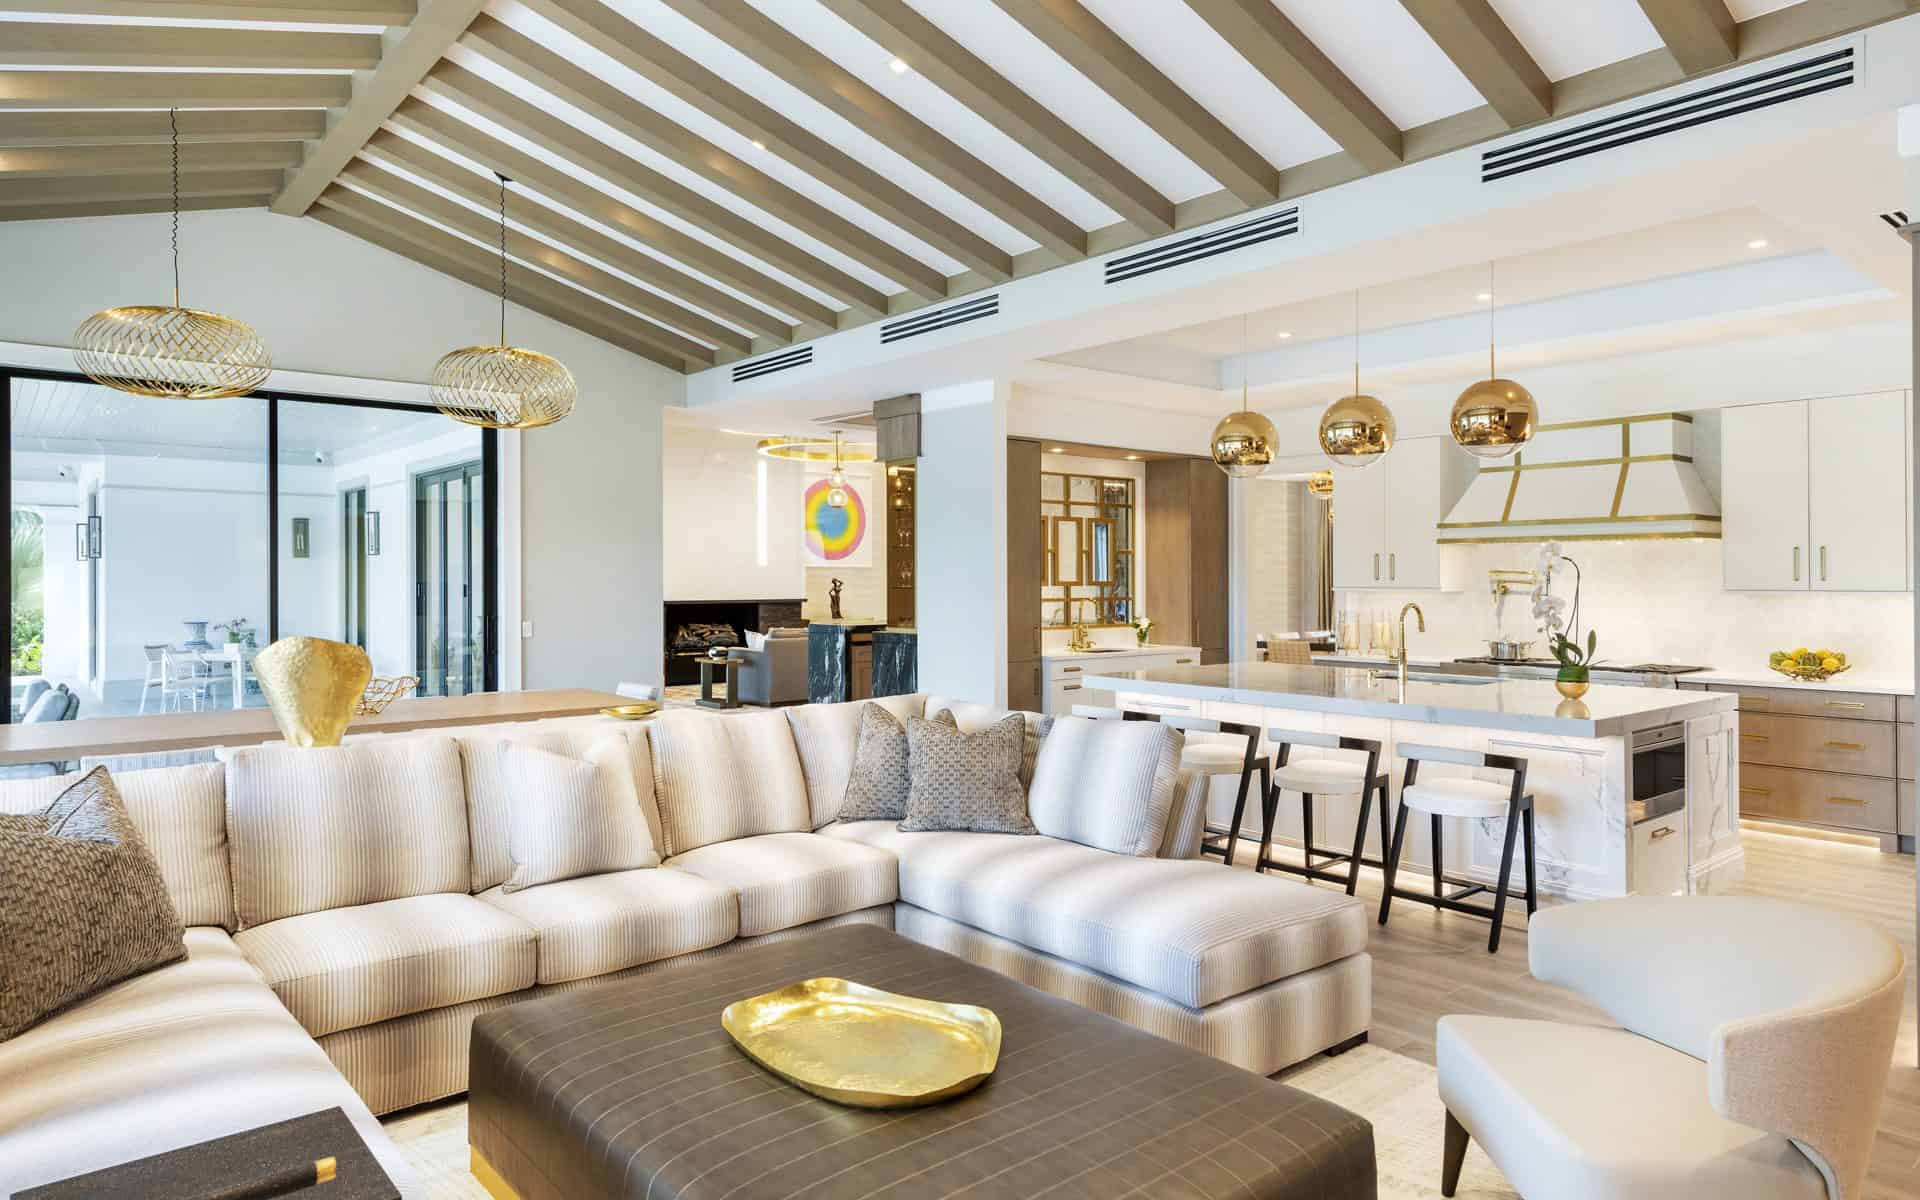 Open-concept living space features light wood beams, modern white sofas and adjacent custom white kitchen.